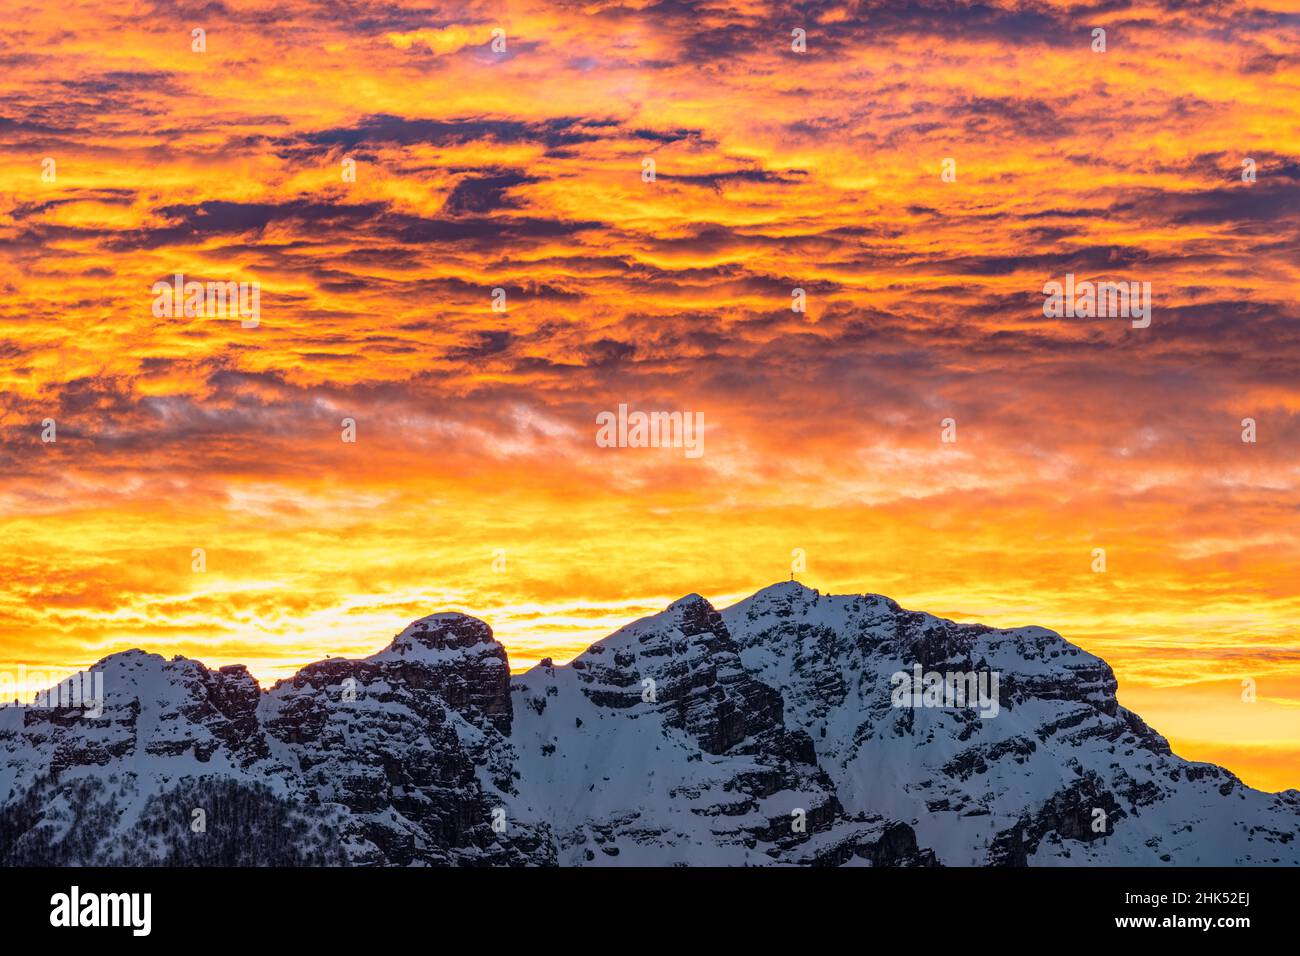 Snowcapped Mount Resegone under the colorful sky at sunrise, Lake Como, Lecco province, Lombardy, Italy, Europe Stock Photo